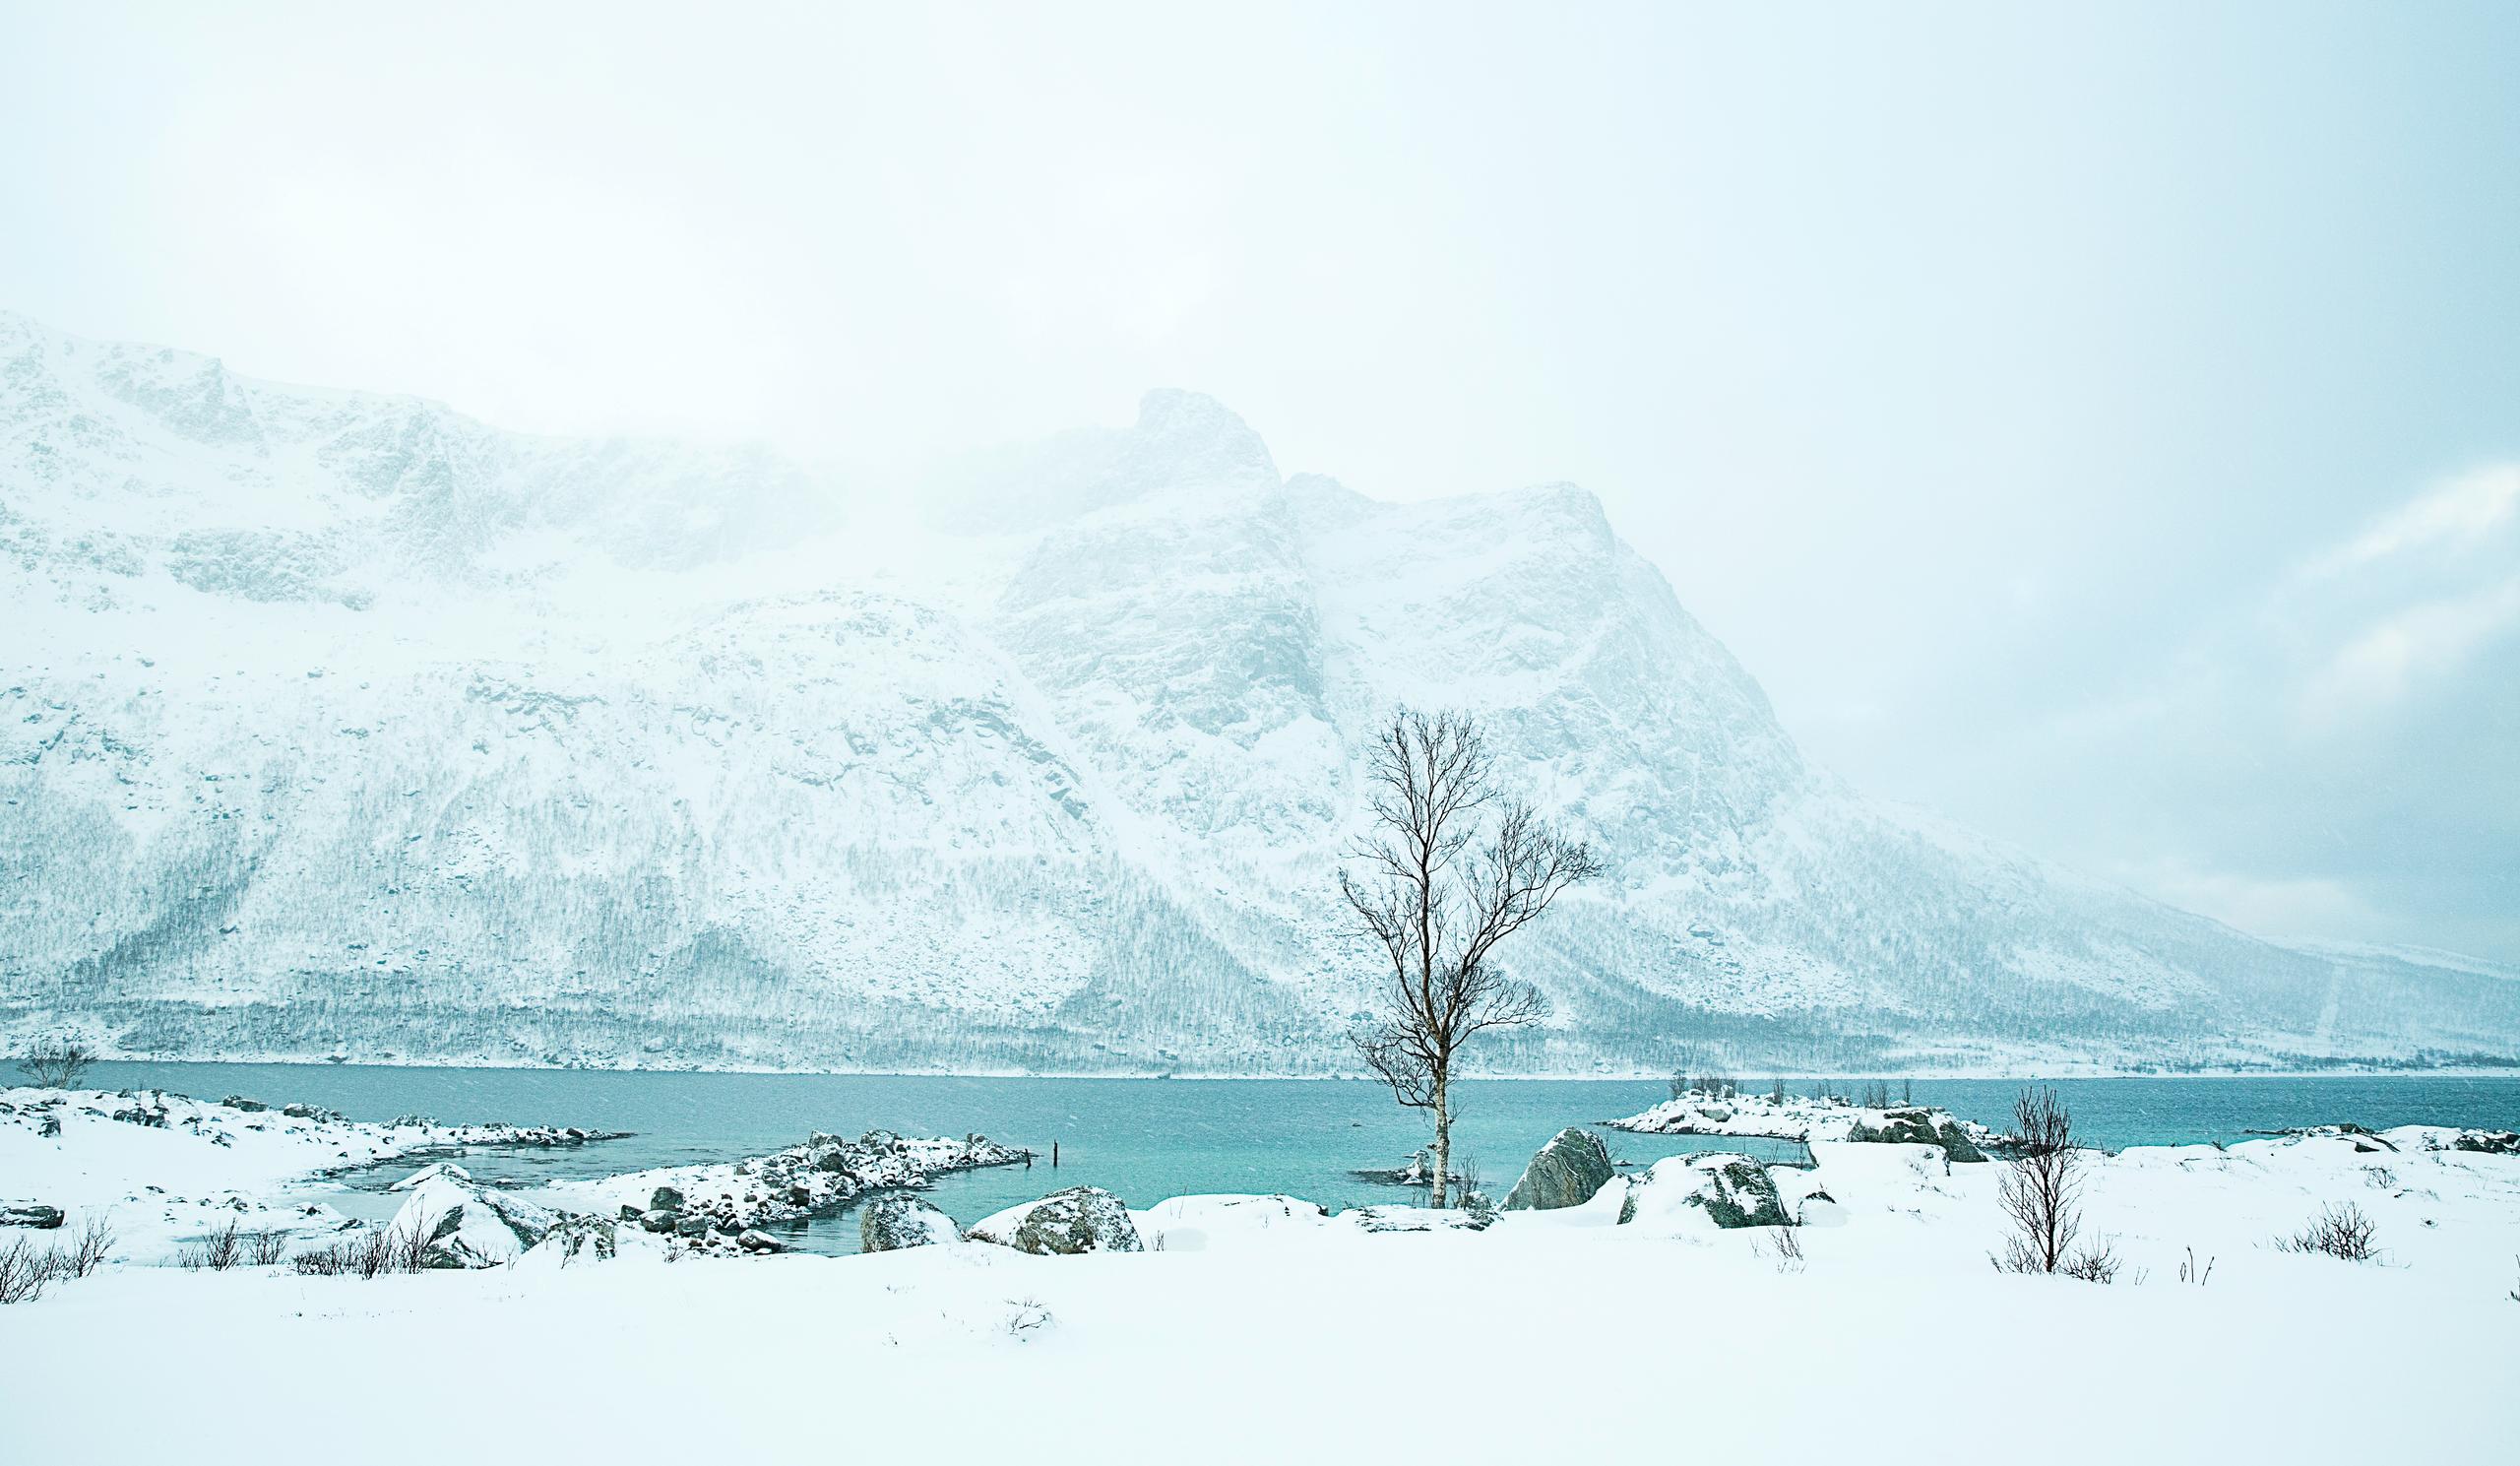 snowy lake and mountain in Norway.